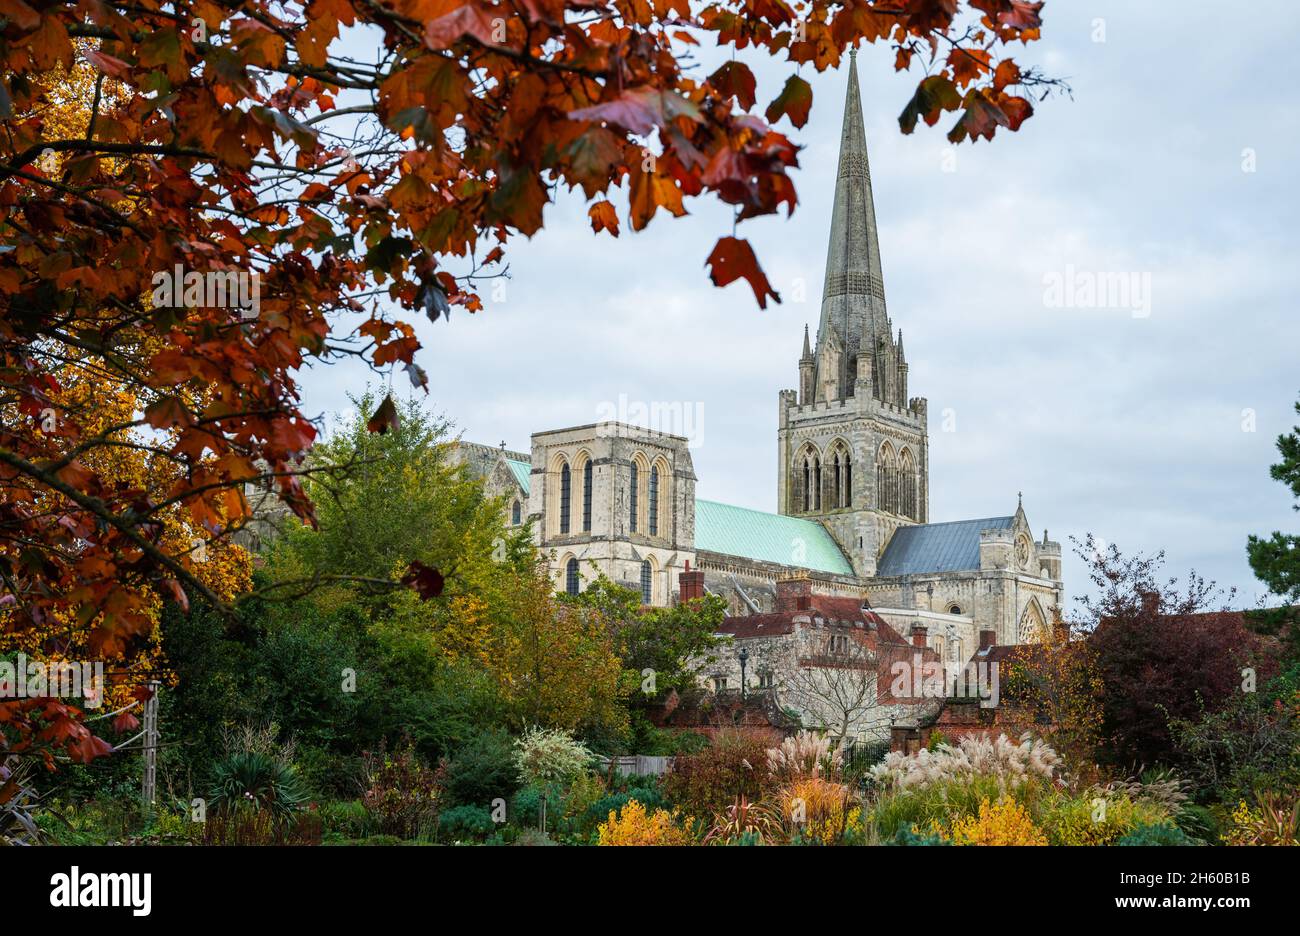 View of the historic Chichester Cathedral with Autumn colours and trees on an overcast day in the City of Chichester, West Sussex, England, UK. Stock Photo